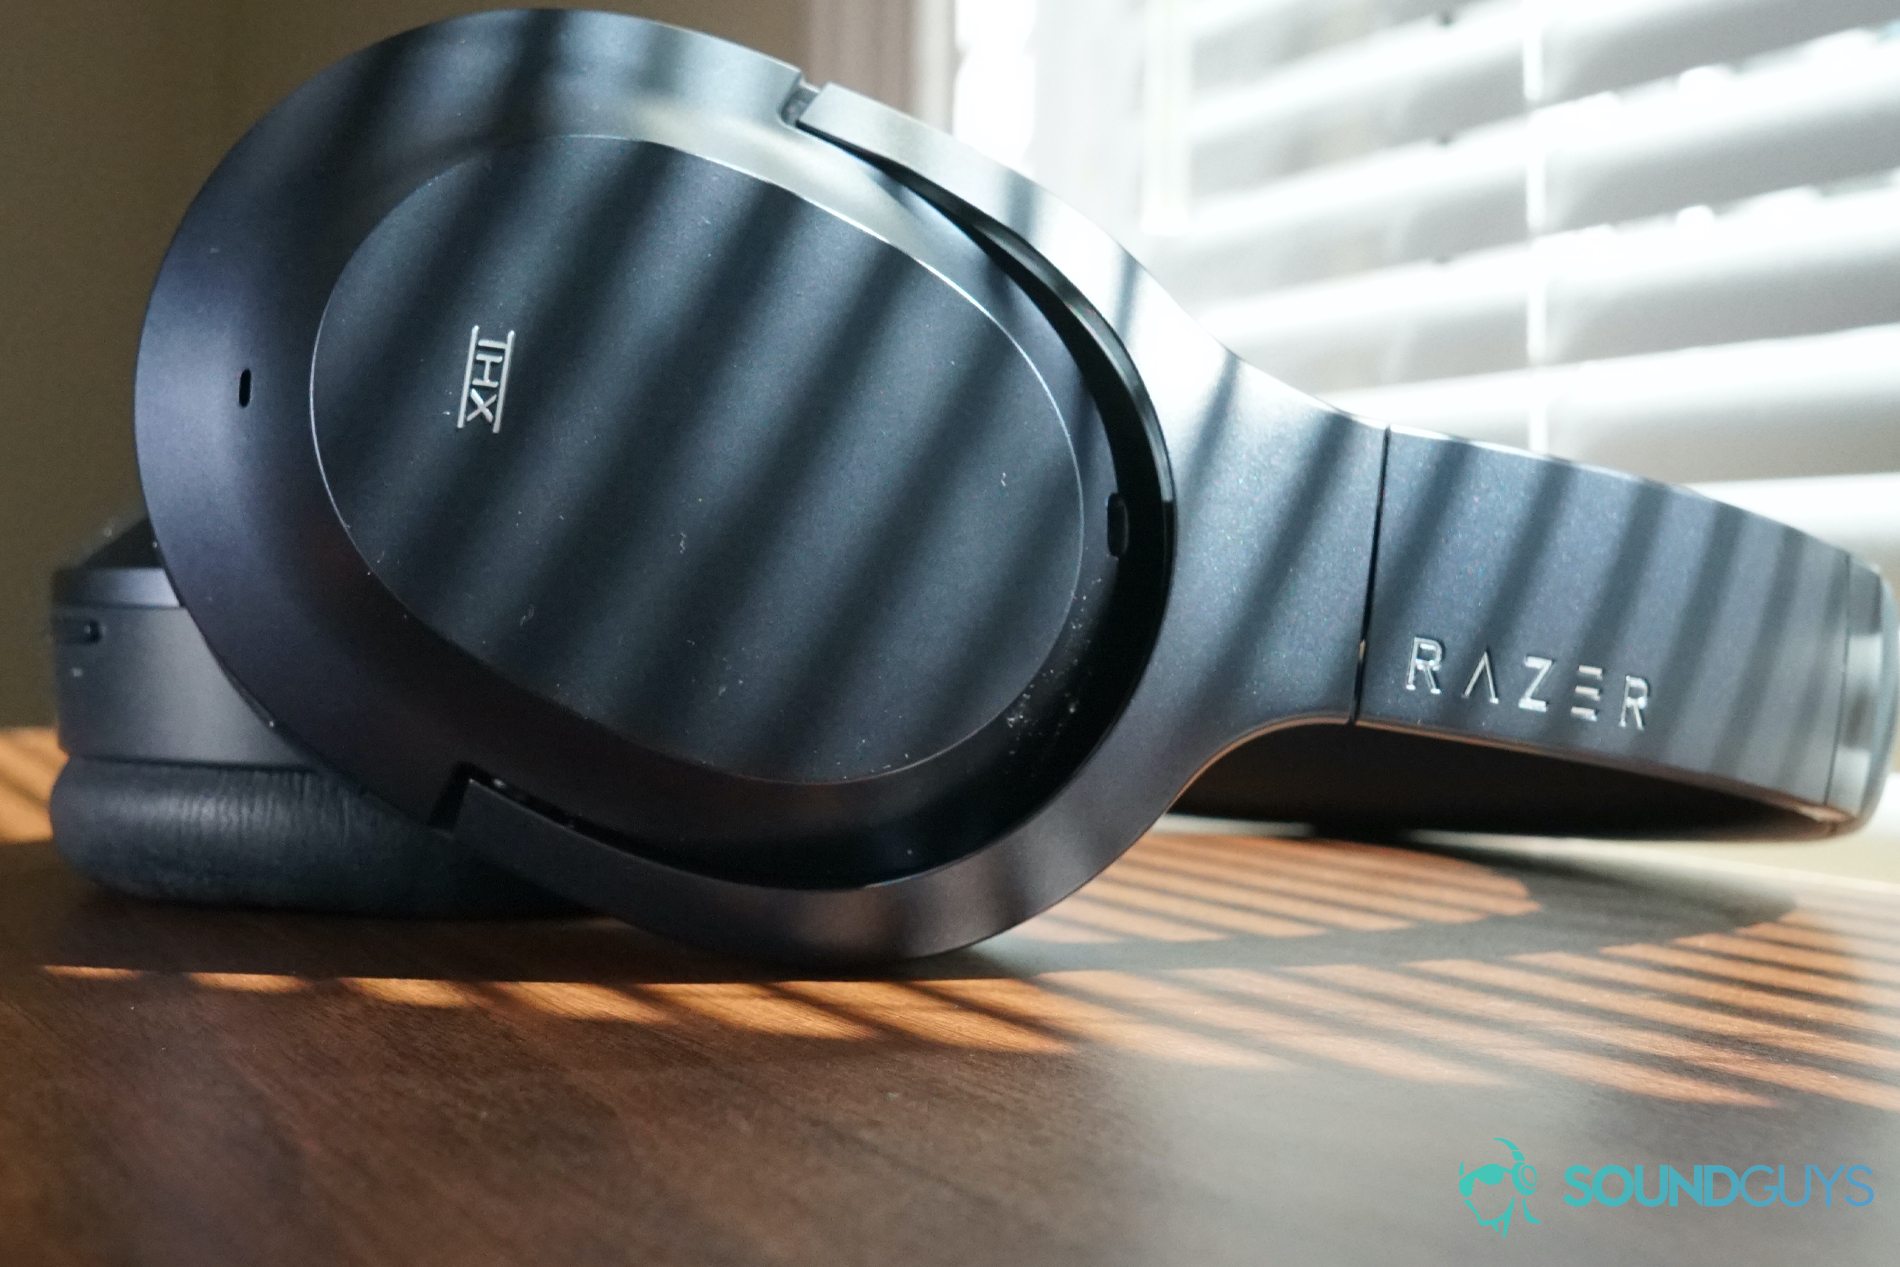 The Razer Opus sits on wooden surface by a window with the blinds down.